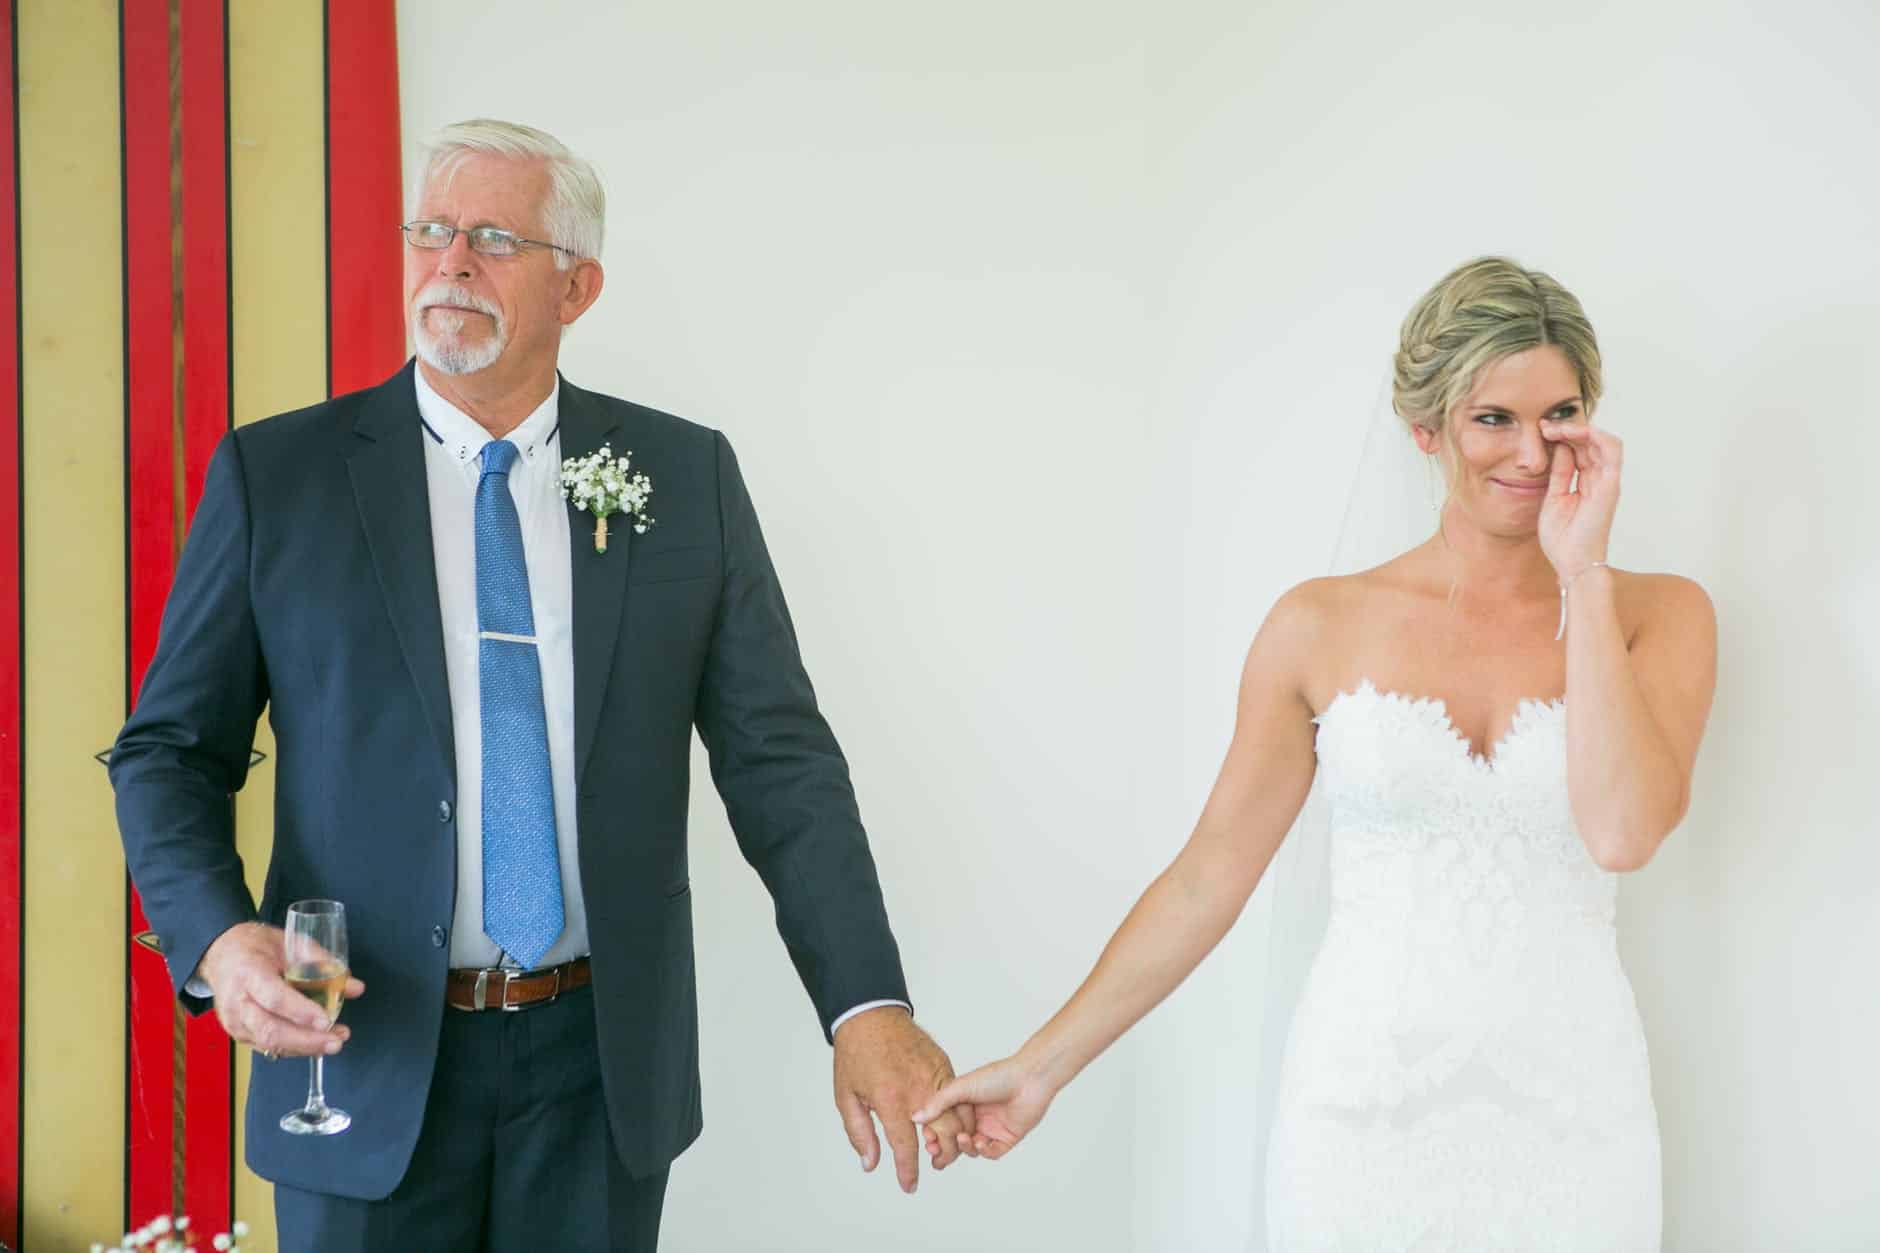 emotional bride with father during wedding celebration